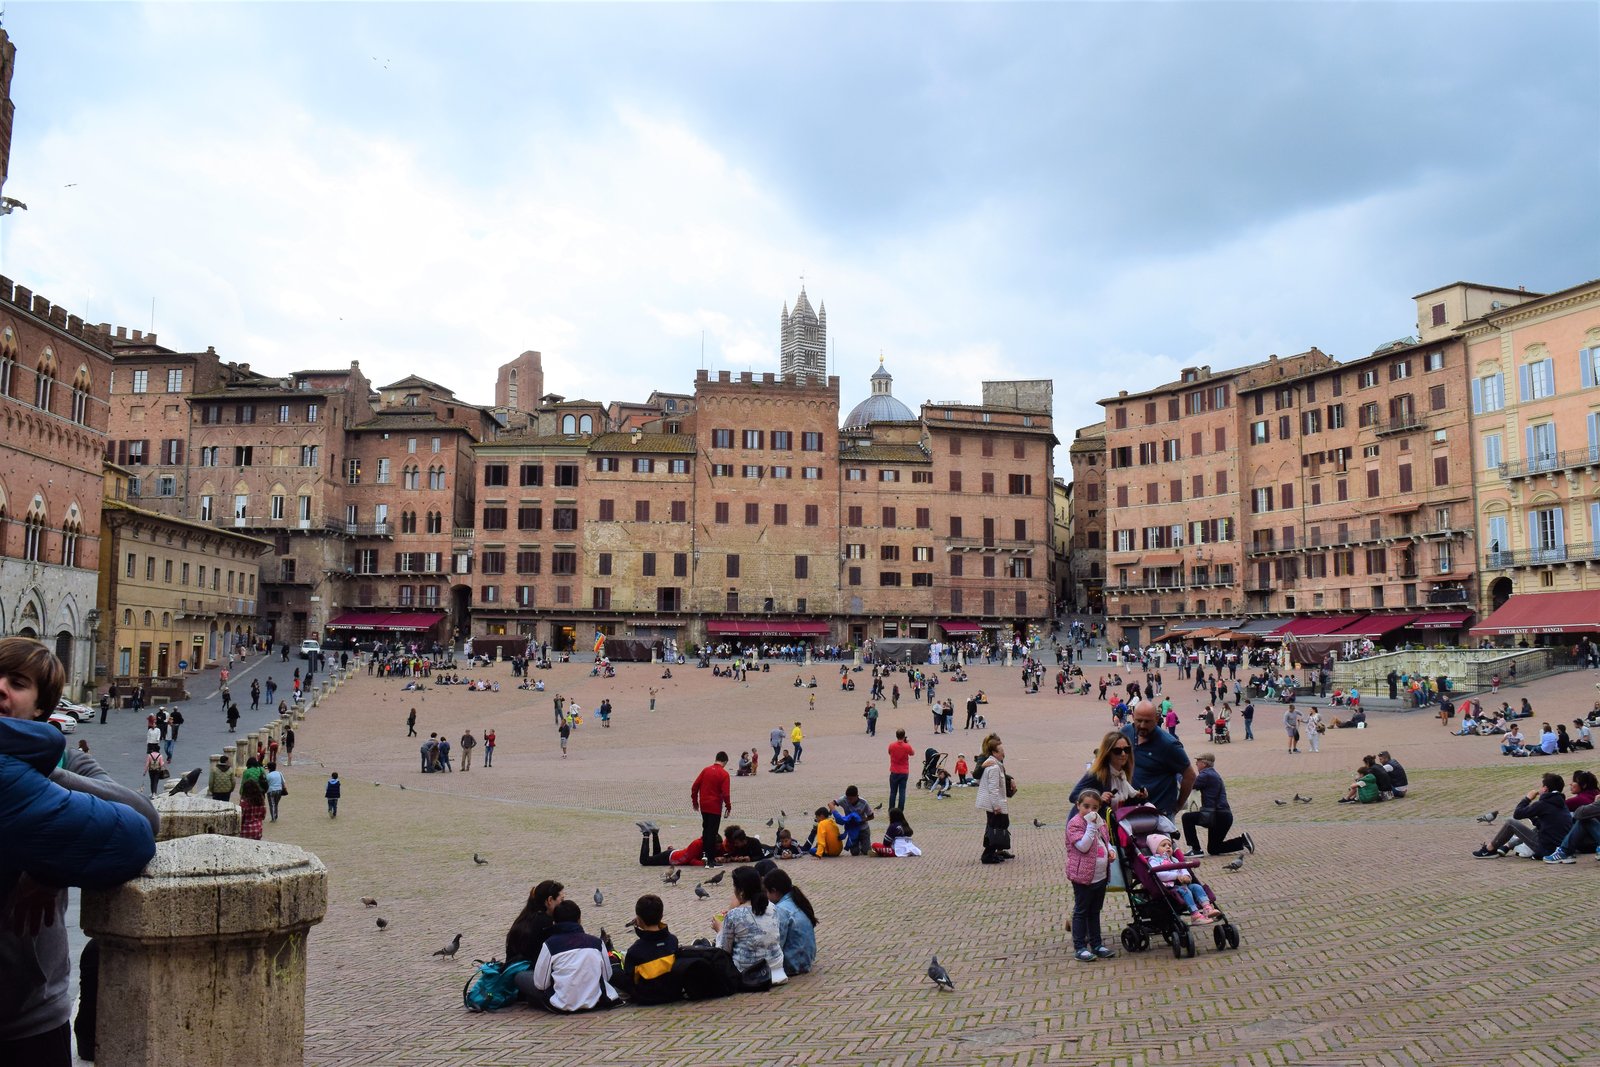 The main piazza in Siena, Italy. ouritalianjourney.com